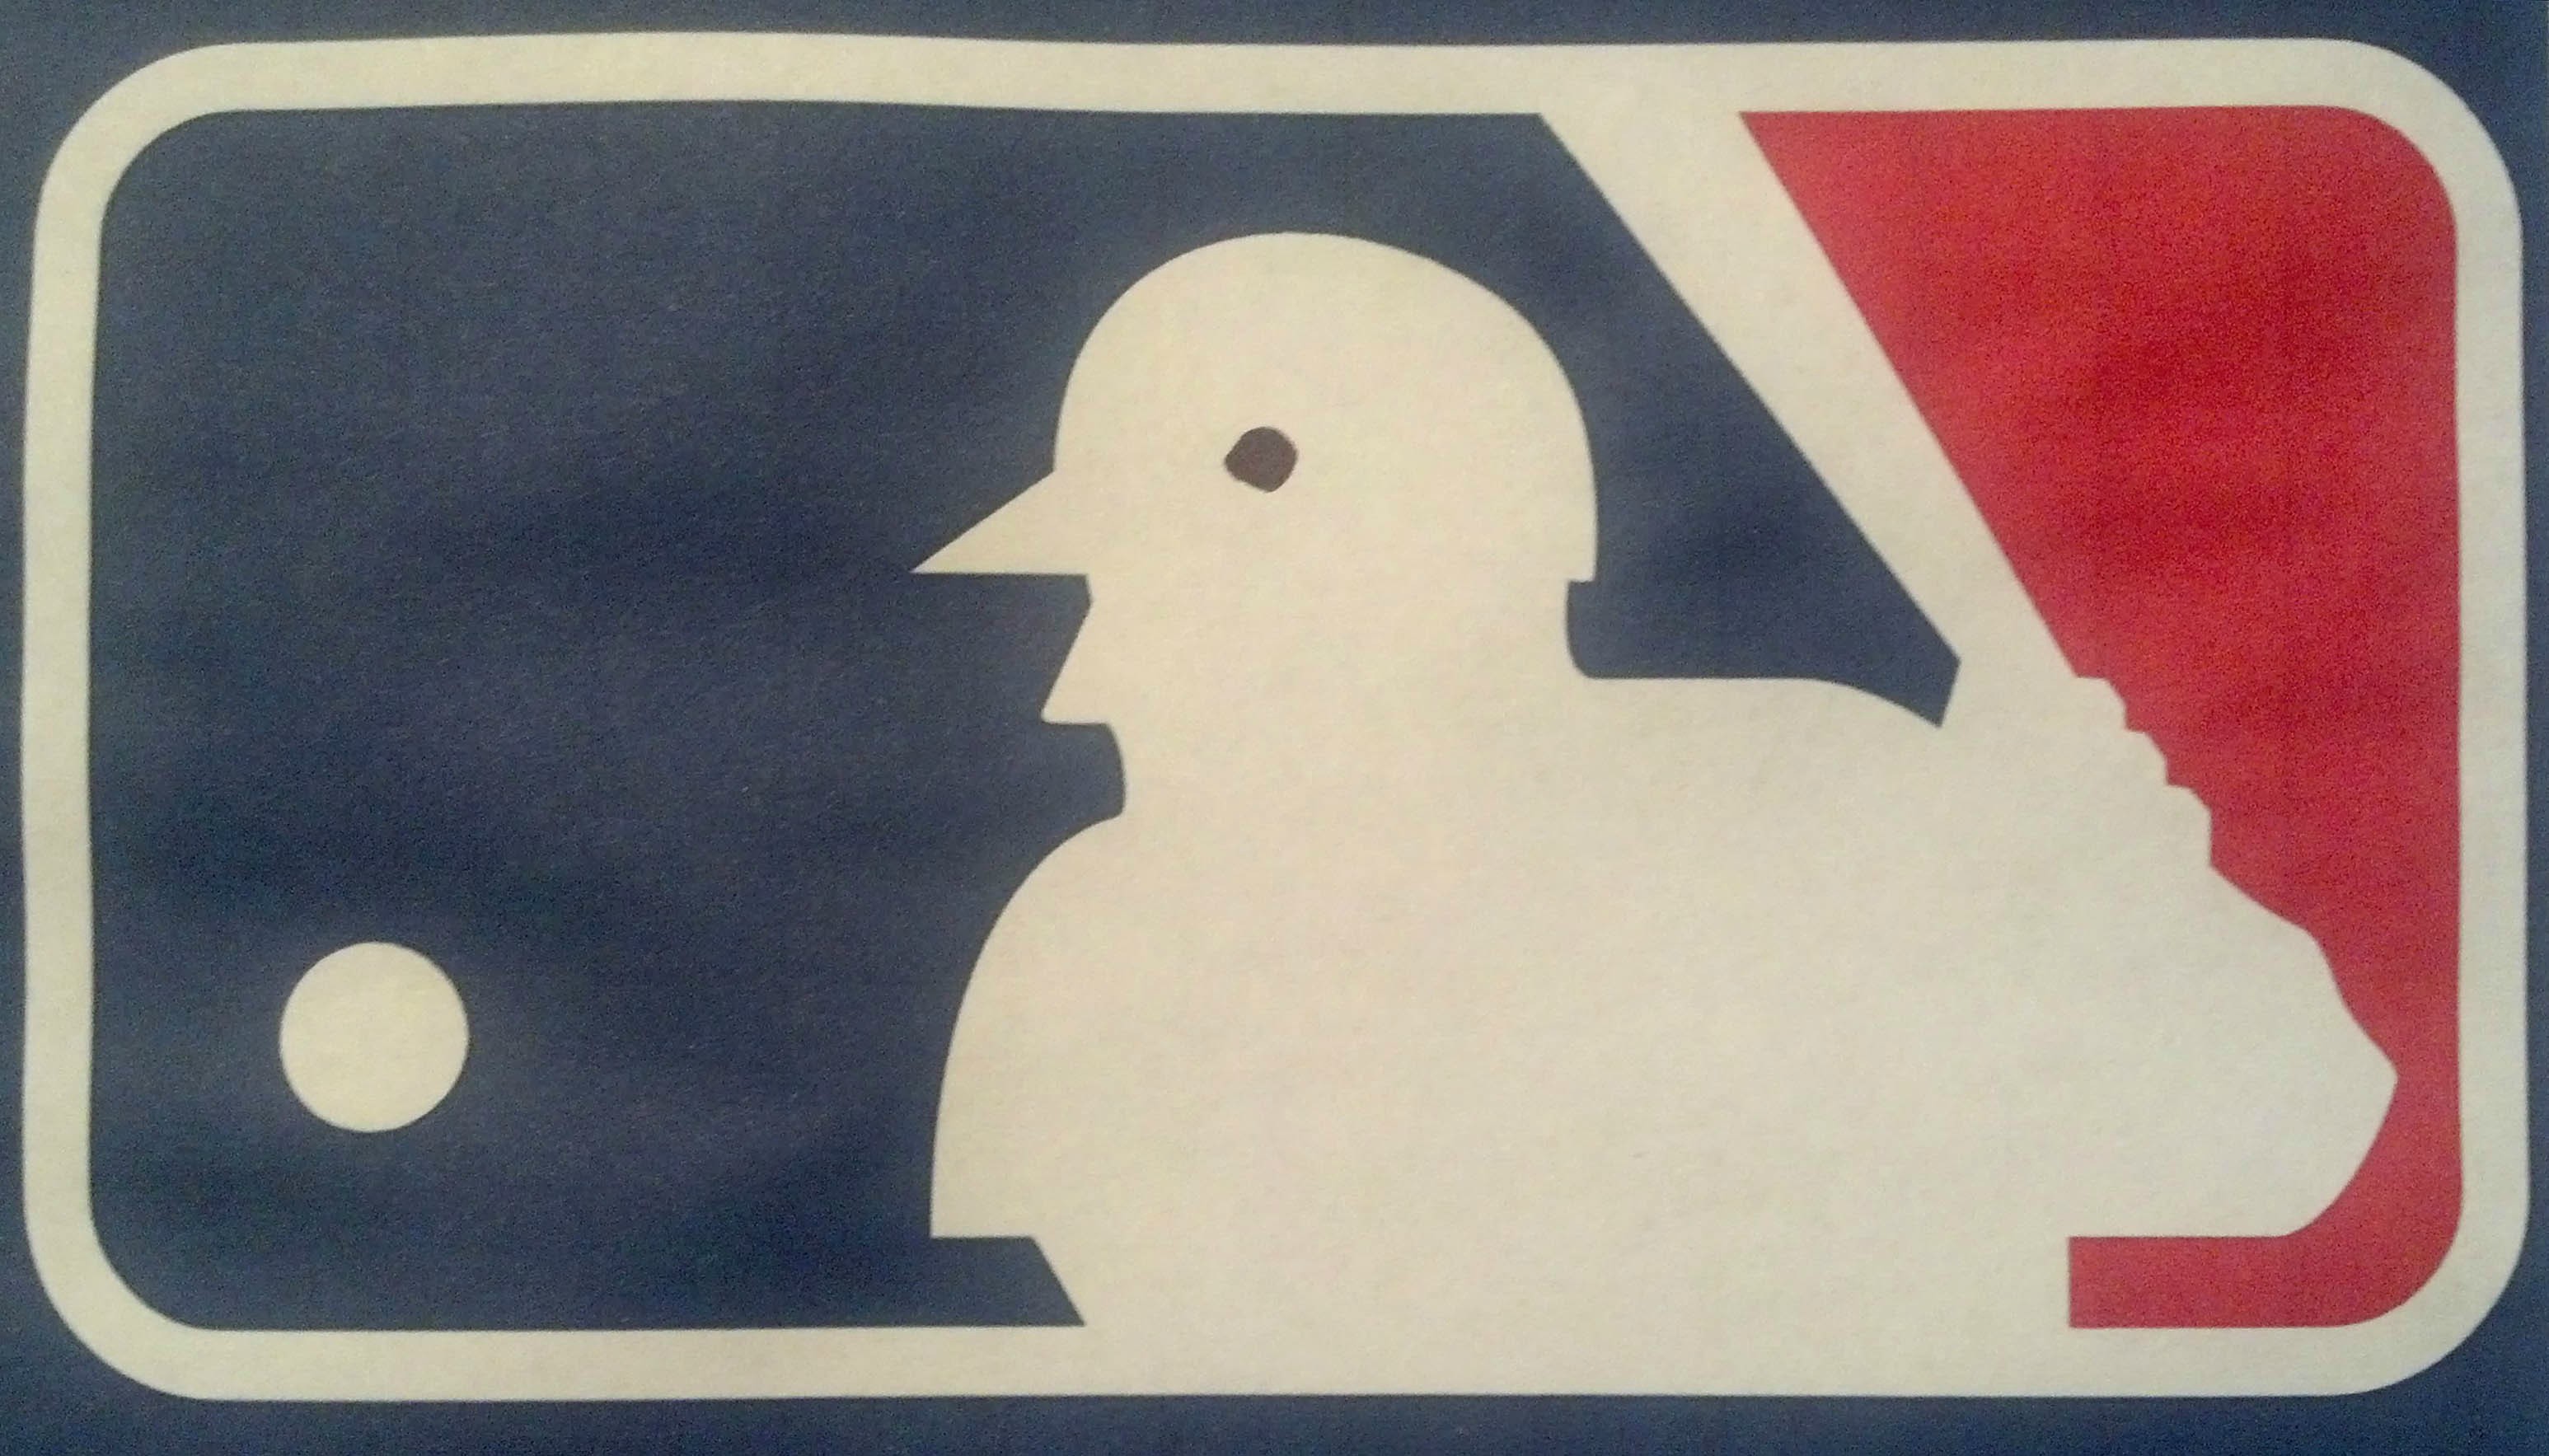 Adding a black dot turns the MLB logo into a bird with arms and a bat